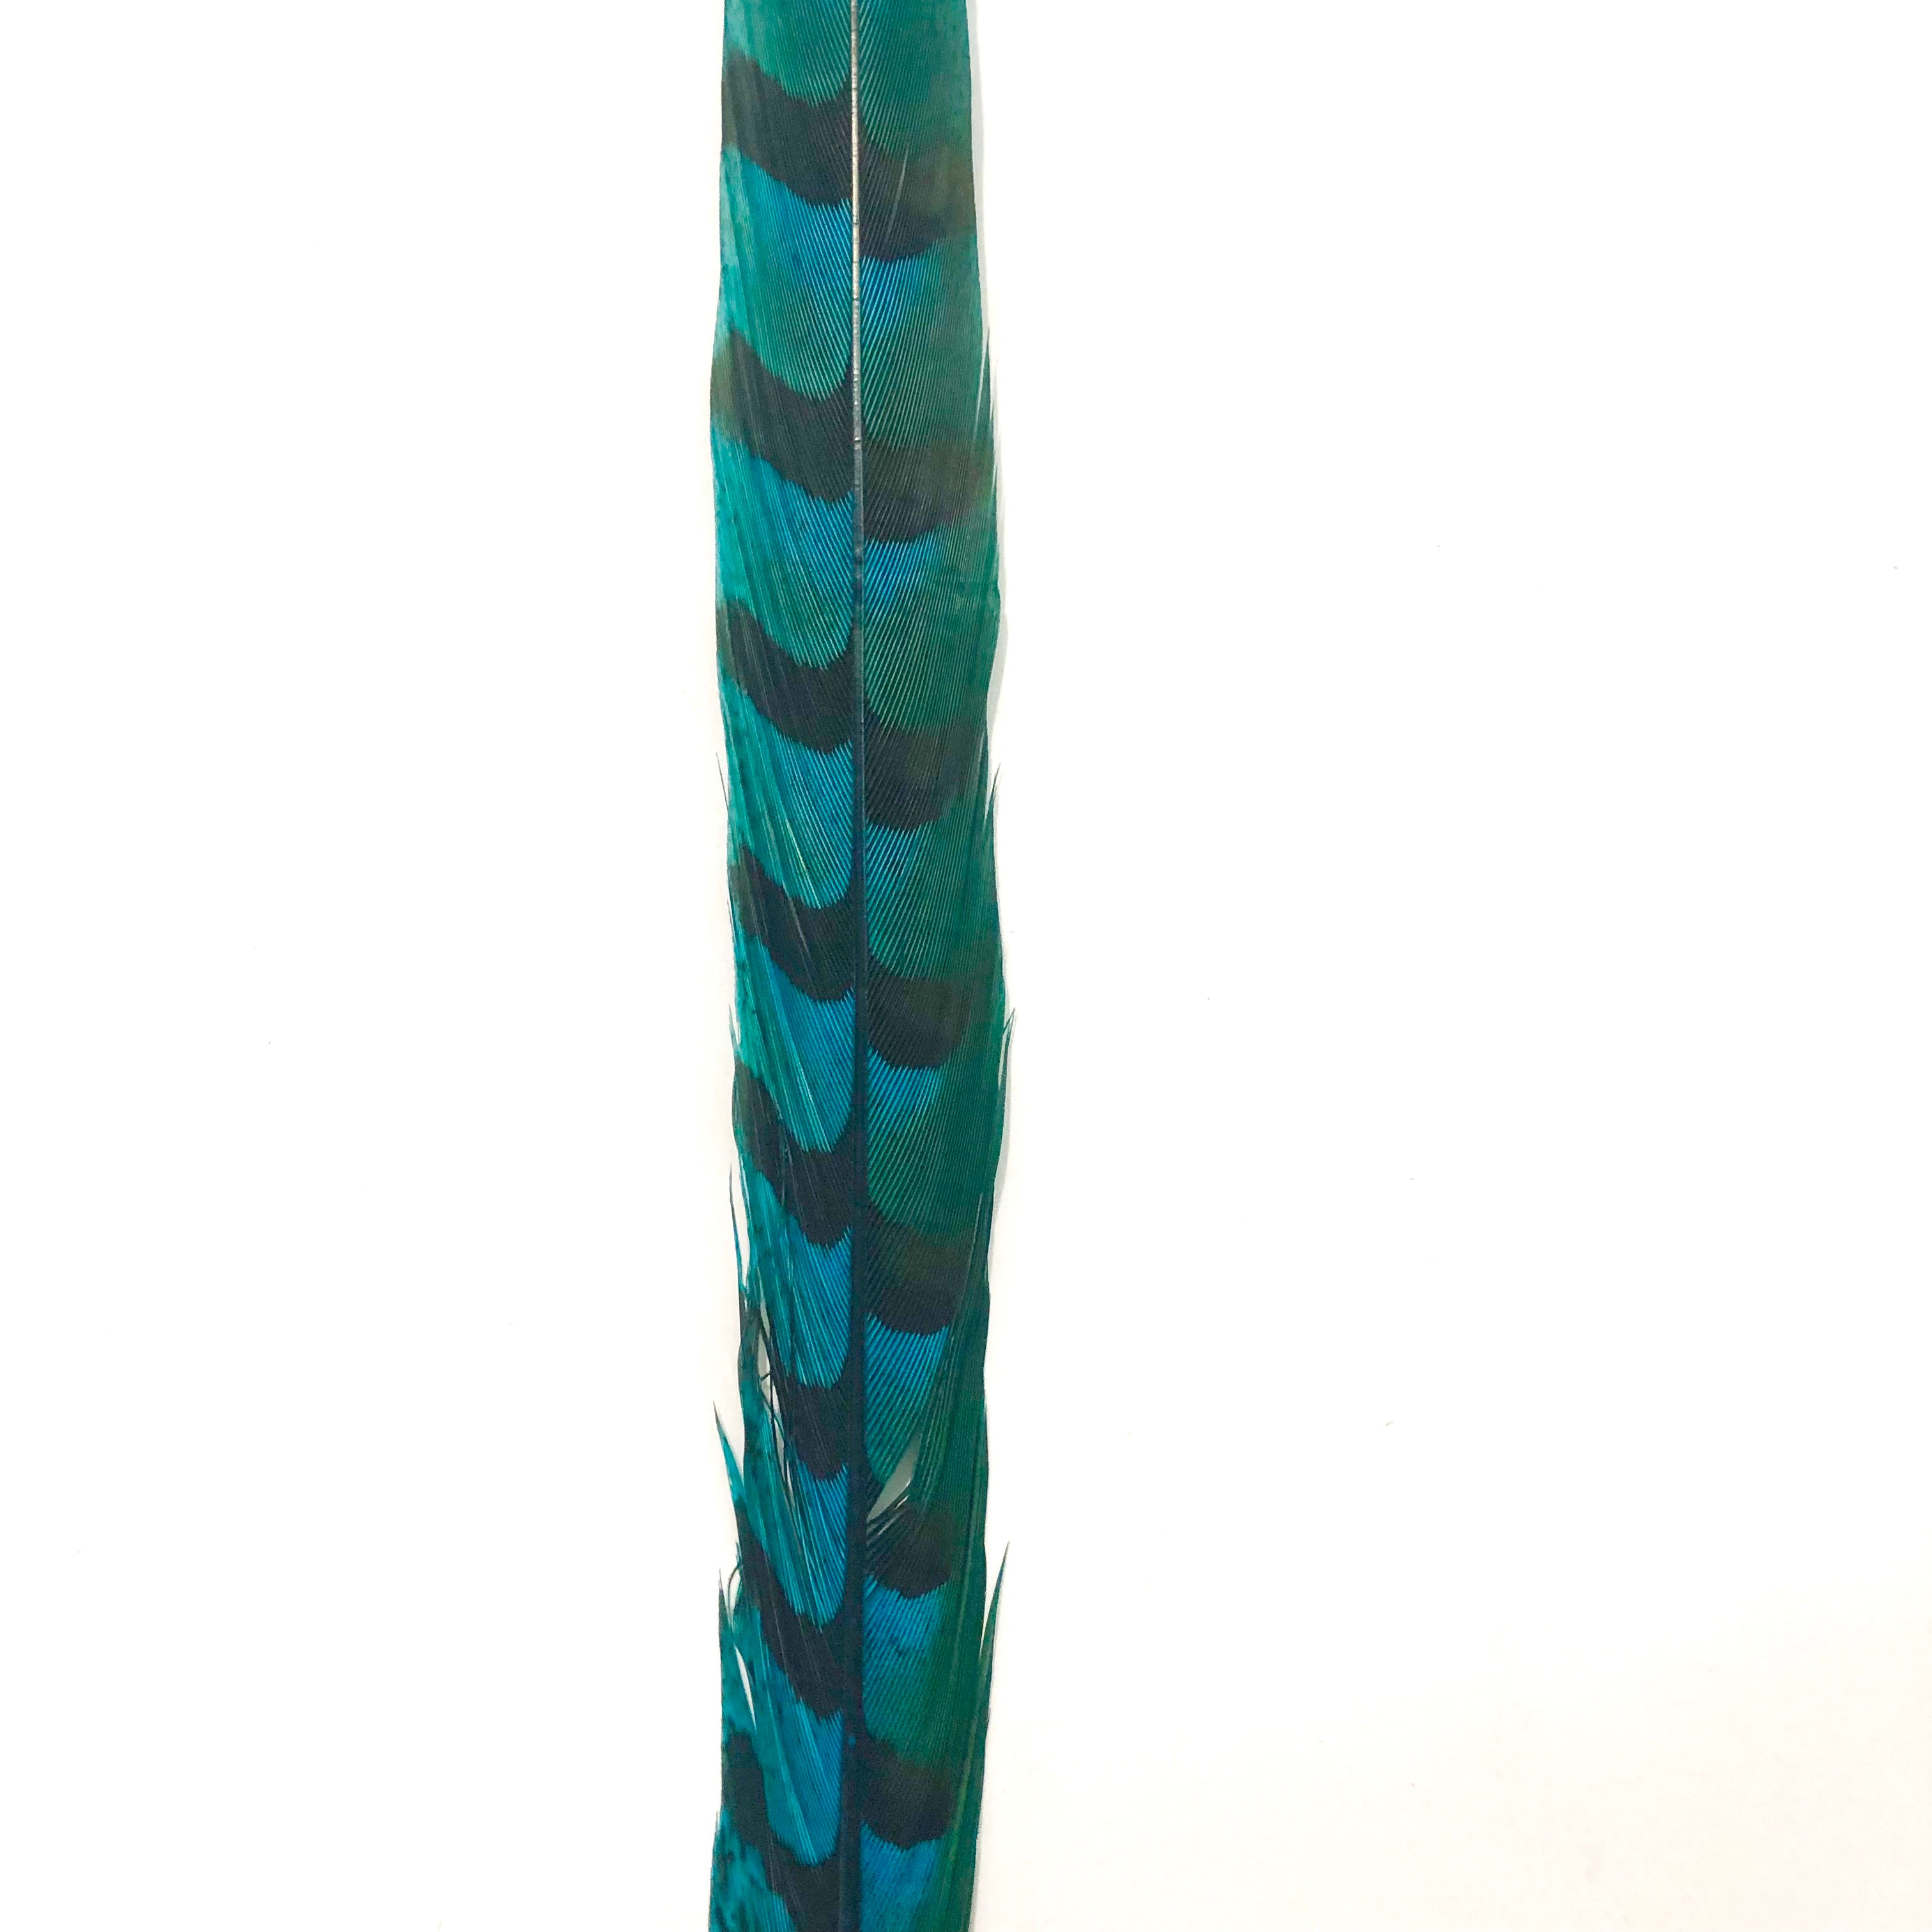 18" to 20" Reeves Pheasant Tail Feather - Turquoise